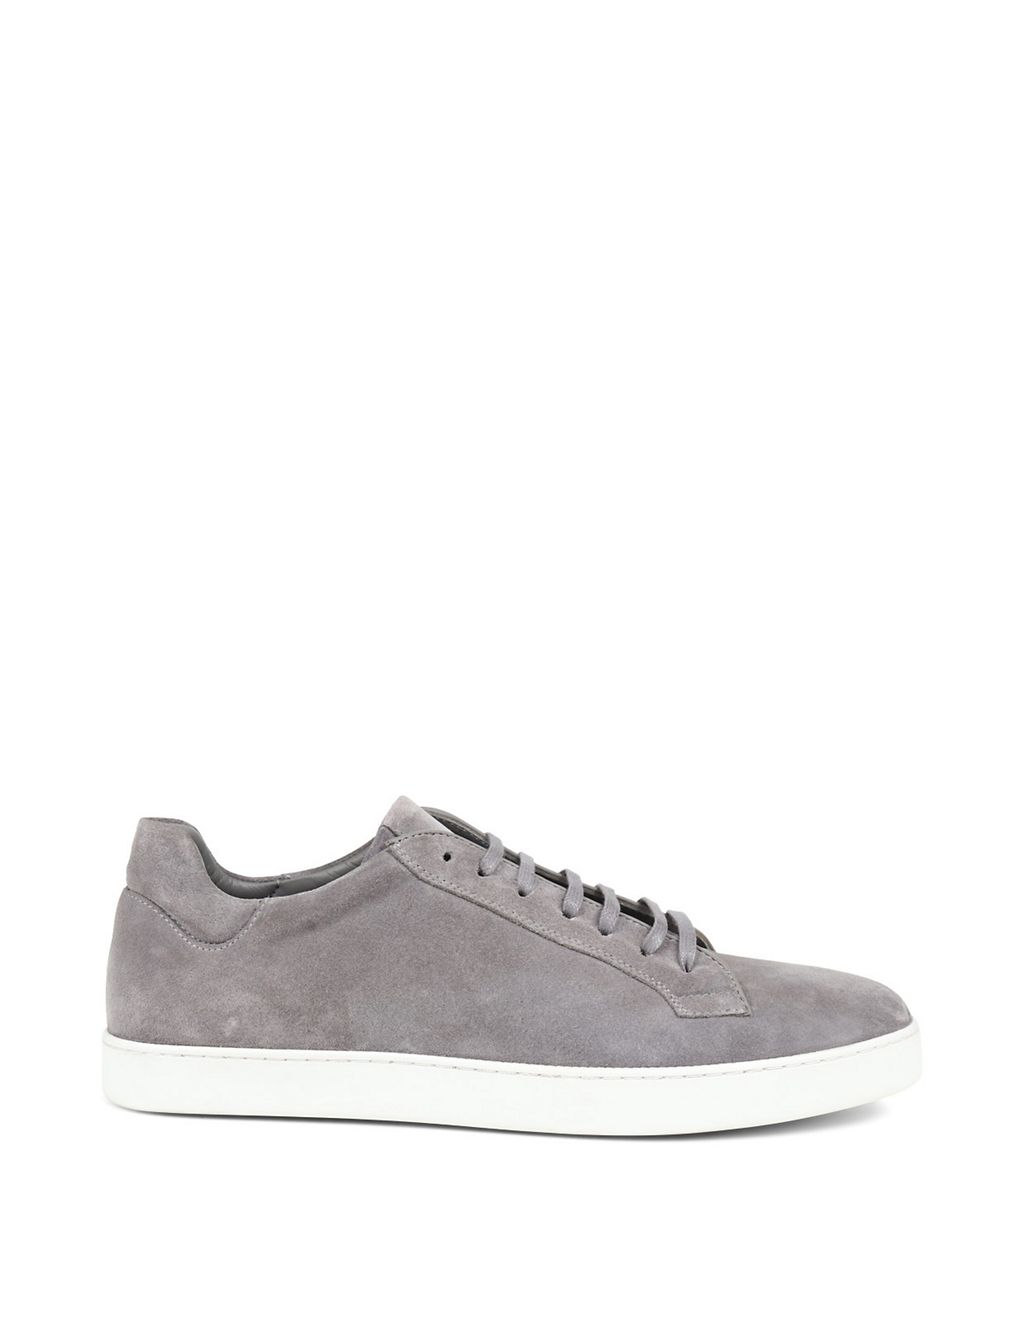 Suede Lace Up Trainers | Jones Bootmaker | M&S